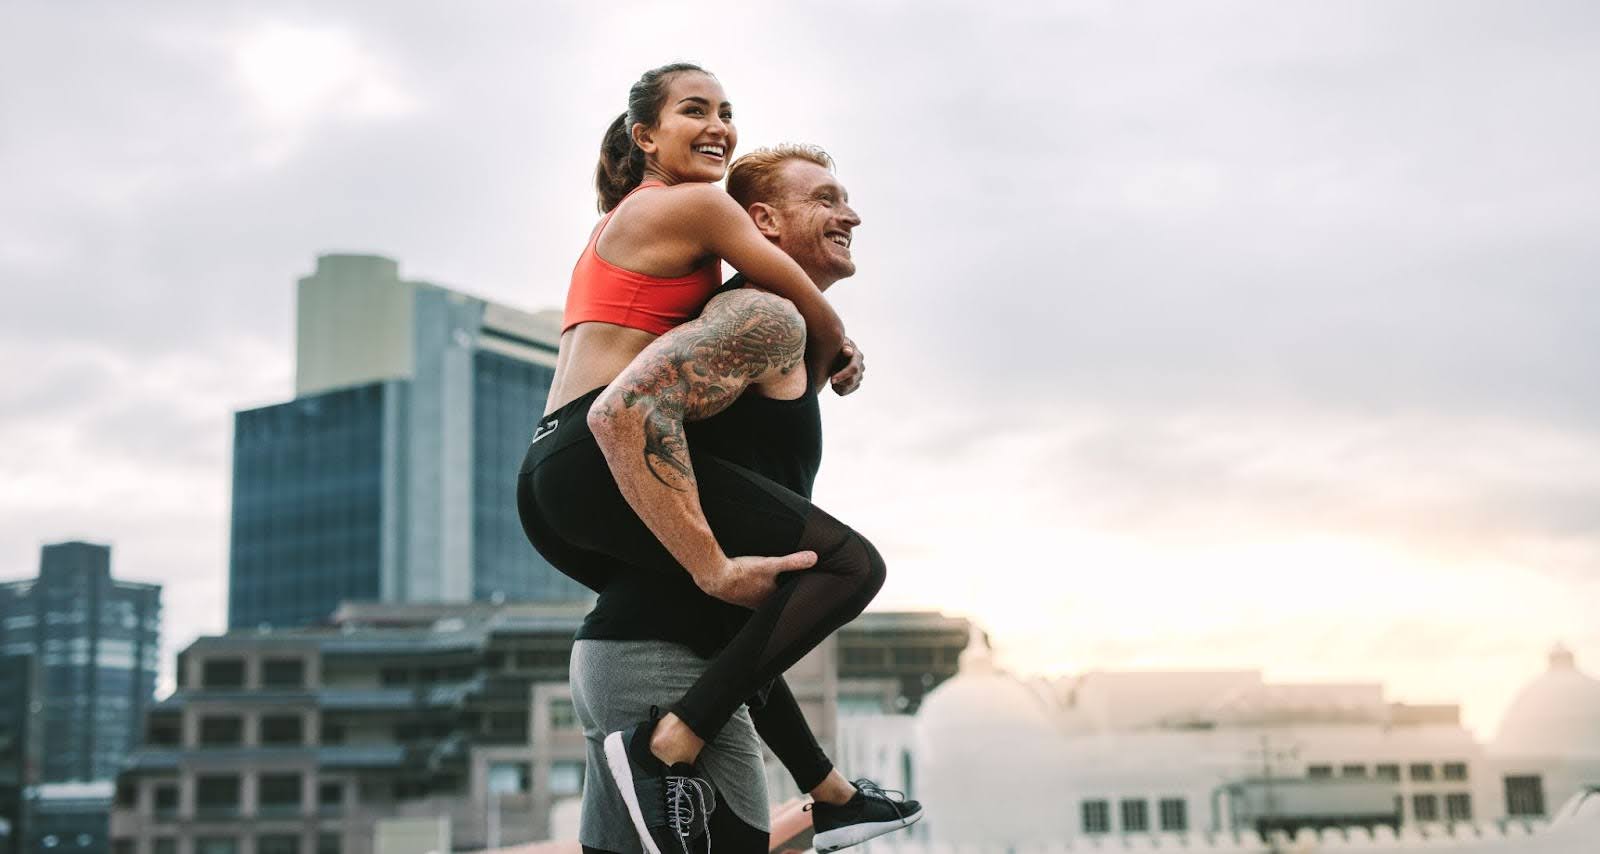 Very fit couple, with woman riding on man’s back, in an urban environment